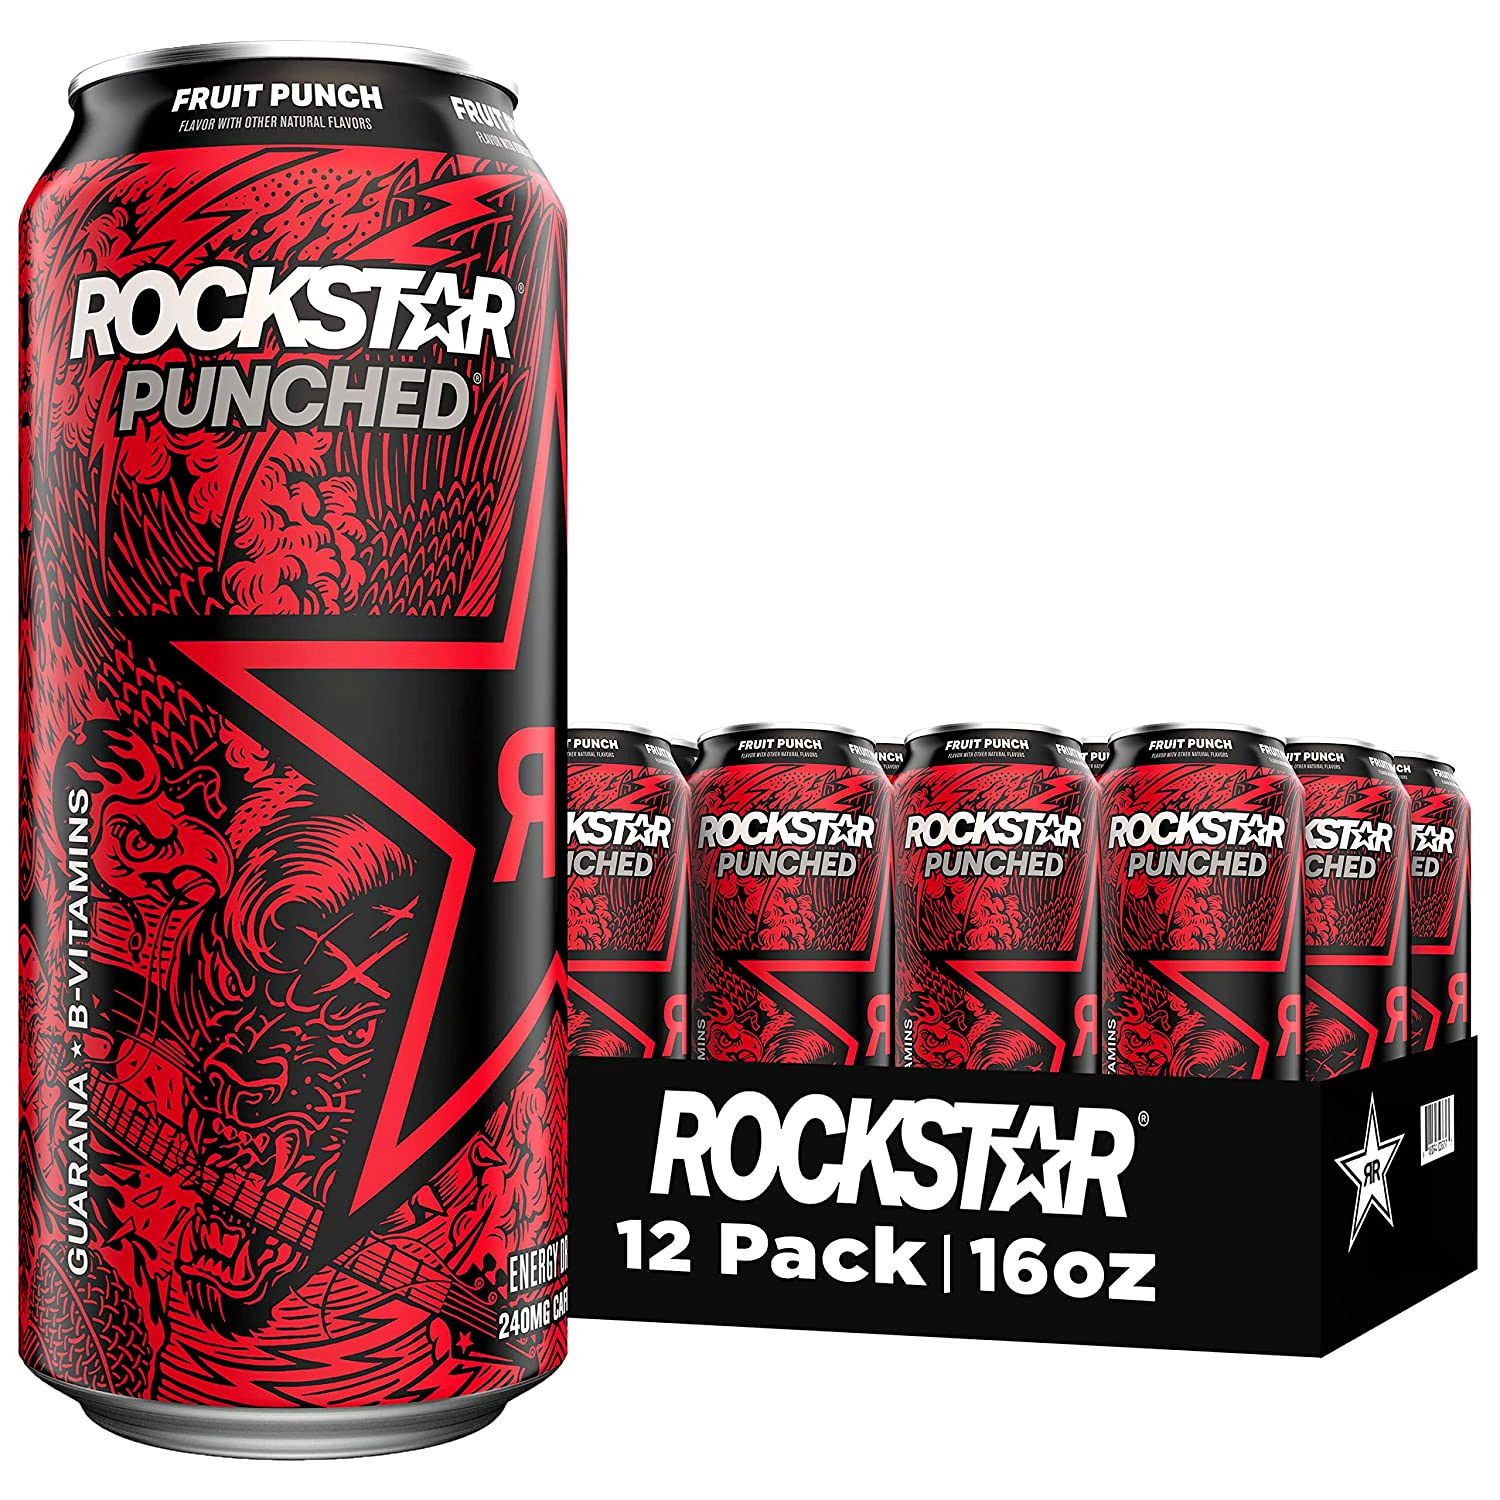 Rockstar Punched Energy Drink, Fruit Punch, 16oz Cans (12 Pack) (Packaging May V